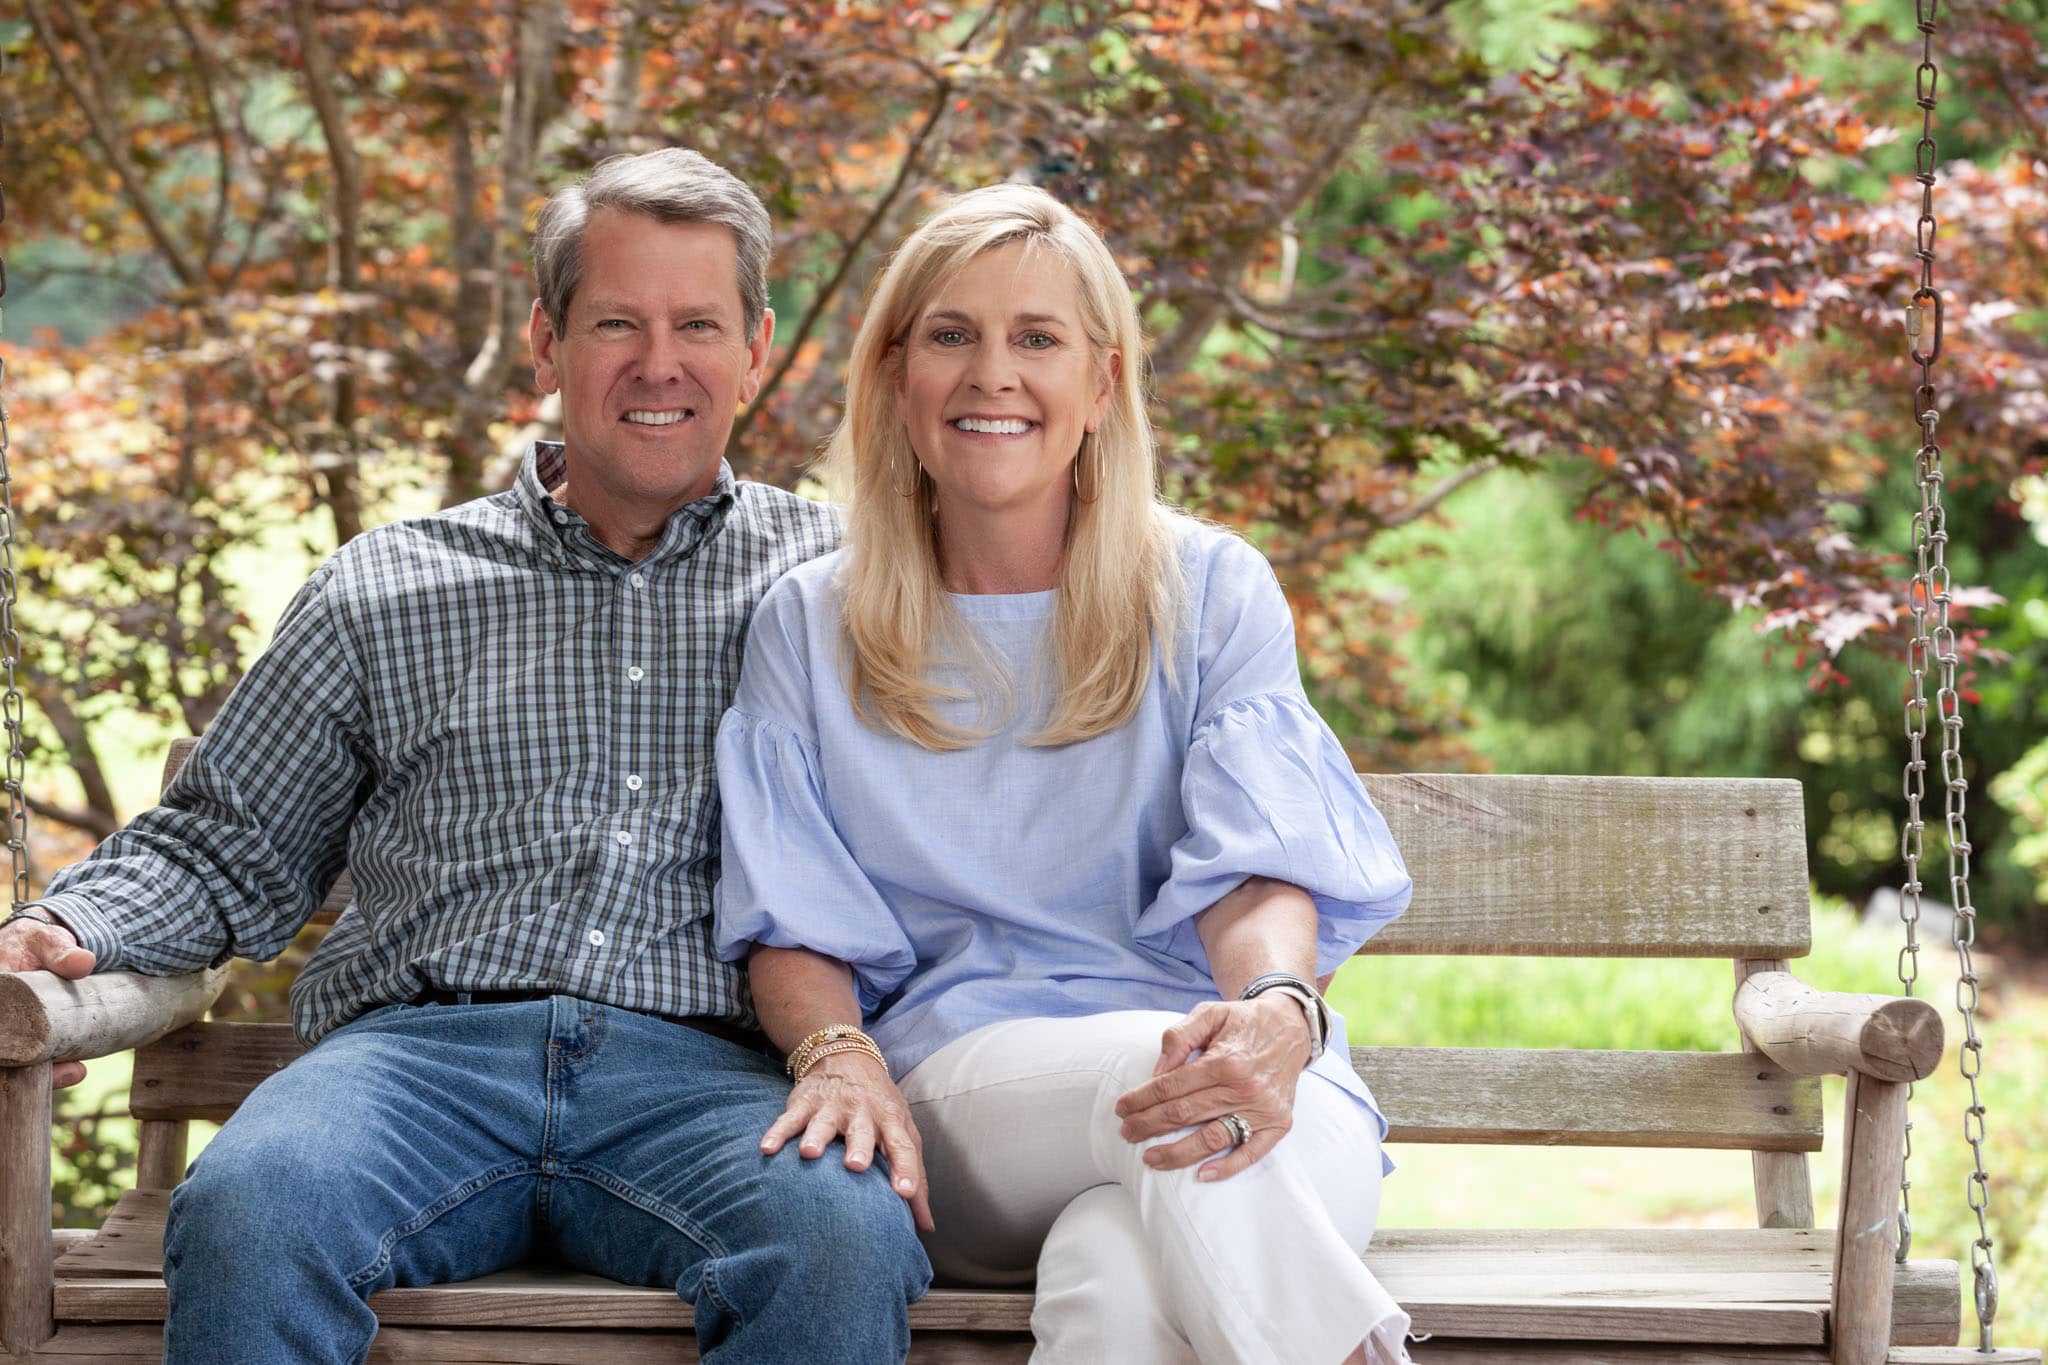 Georgia Governor Brian Kemp and First Lady Marty Kemp sitting next to each other and smiling in a porch swing at their home in Athens, Georgia.